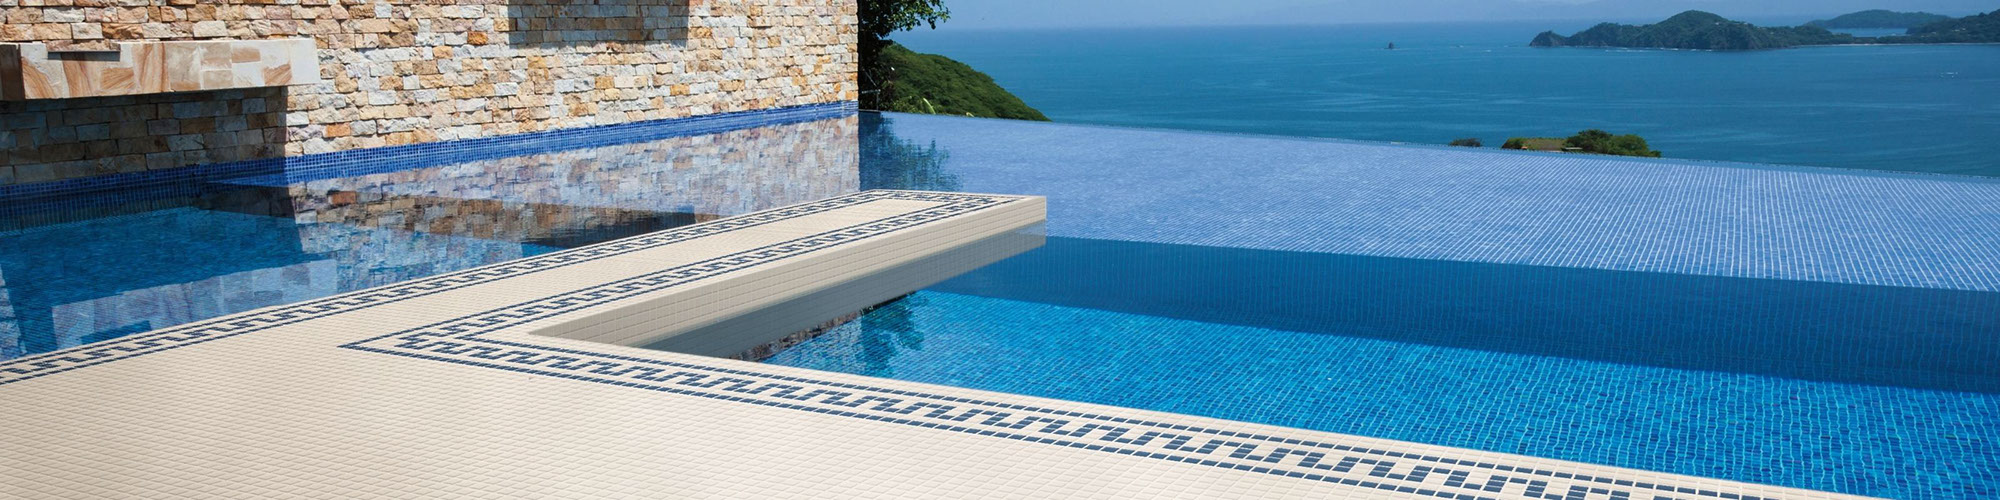 Infinity pool with white tile deck with blue accents and an ocean view with blue skies in the background.